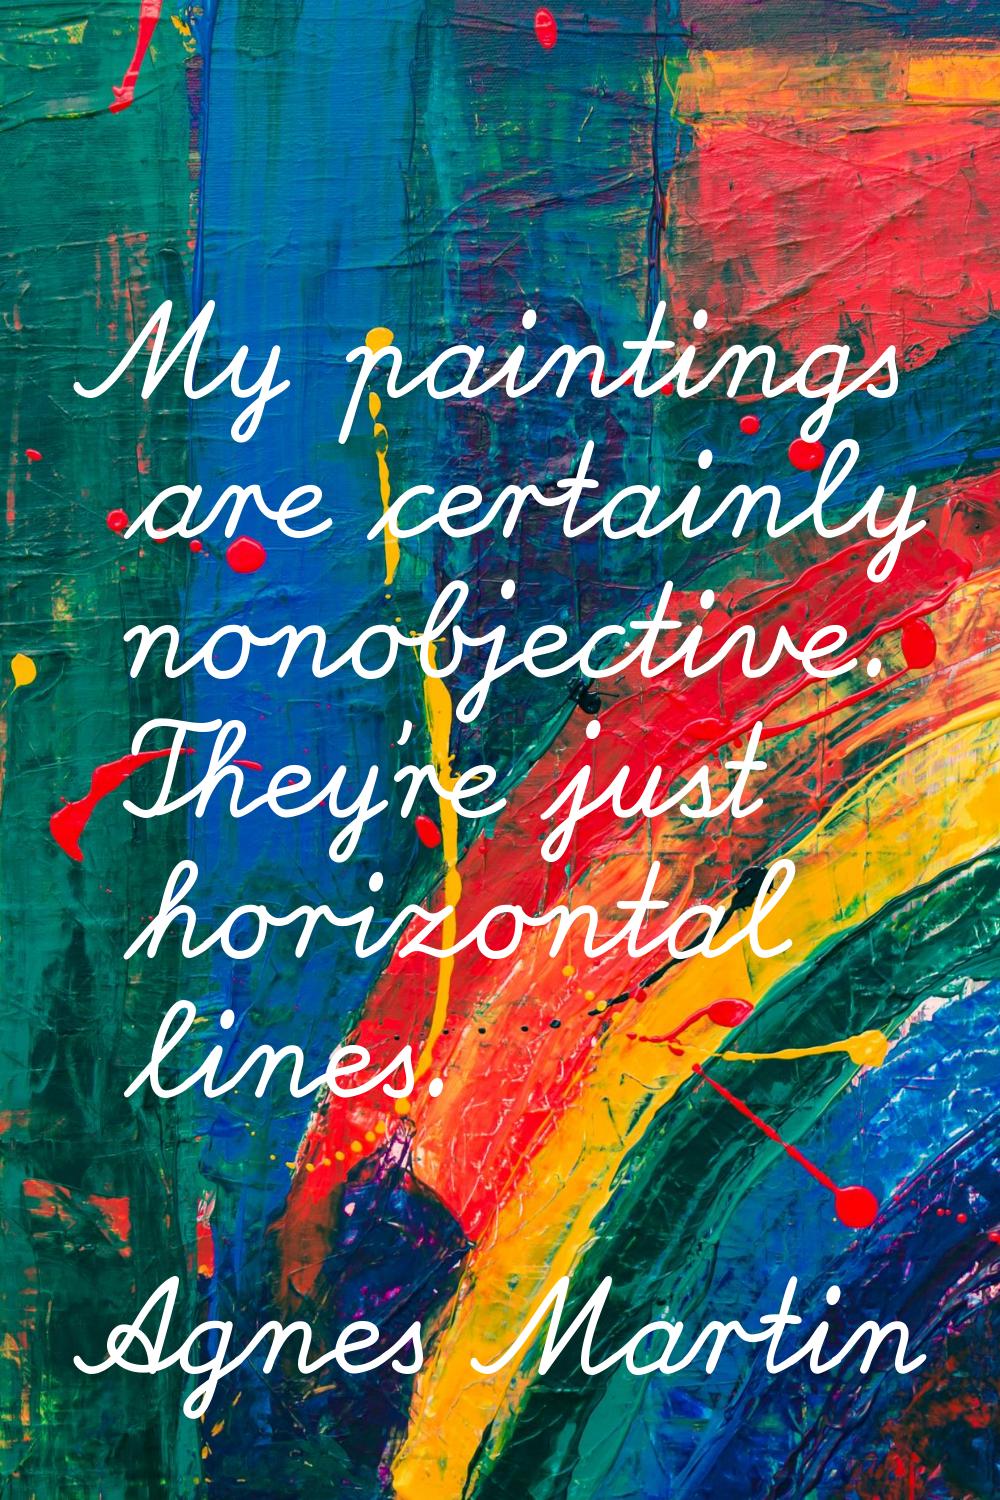 My paintings are certainly nonobjective. They're just horizontal lines.